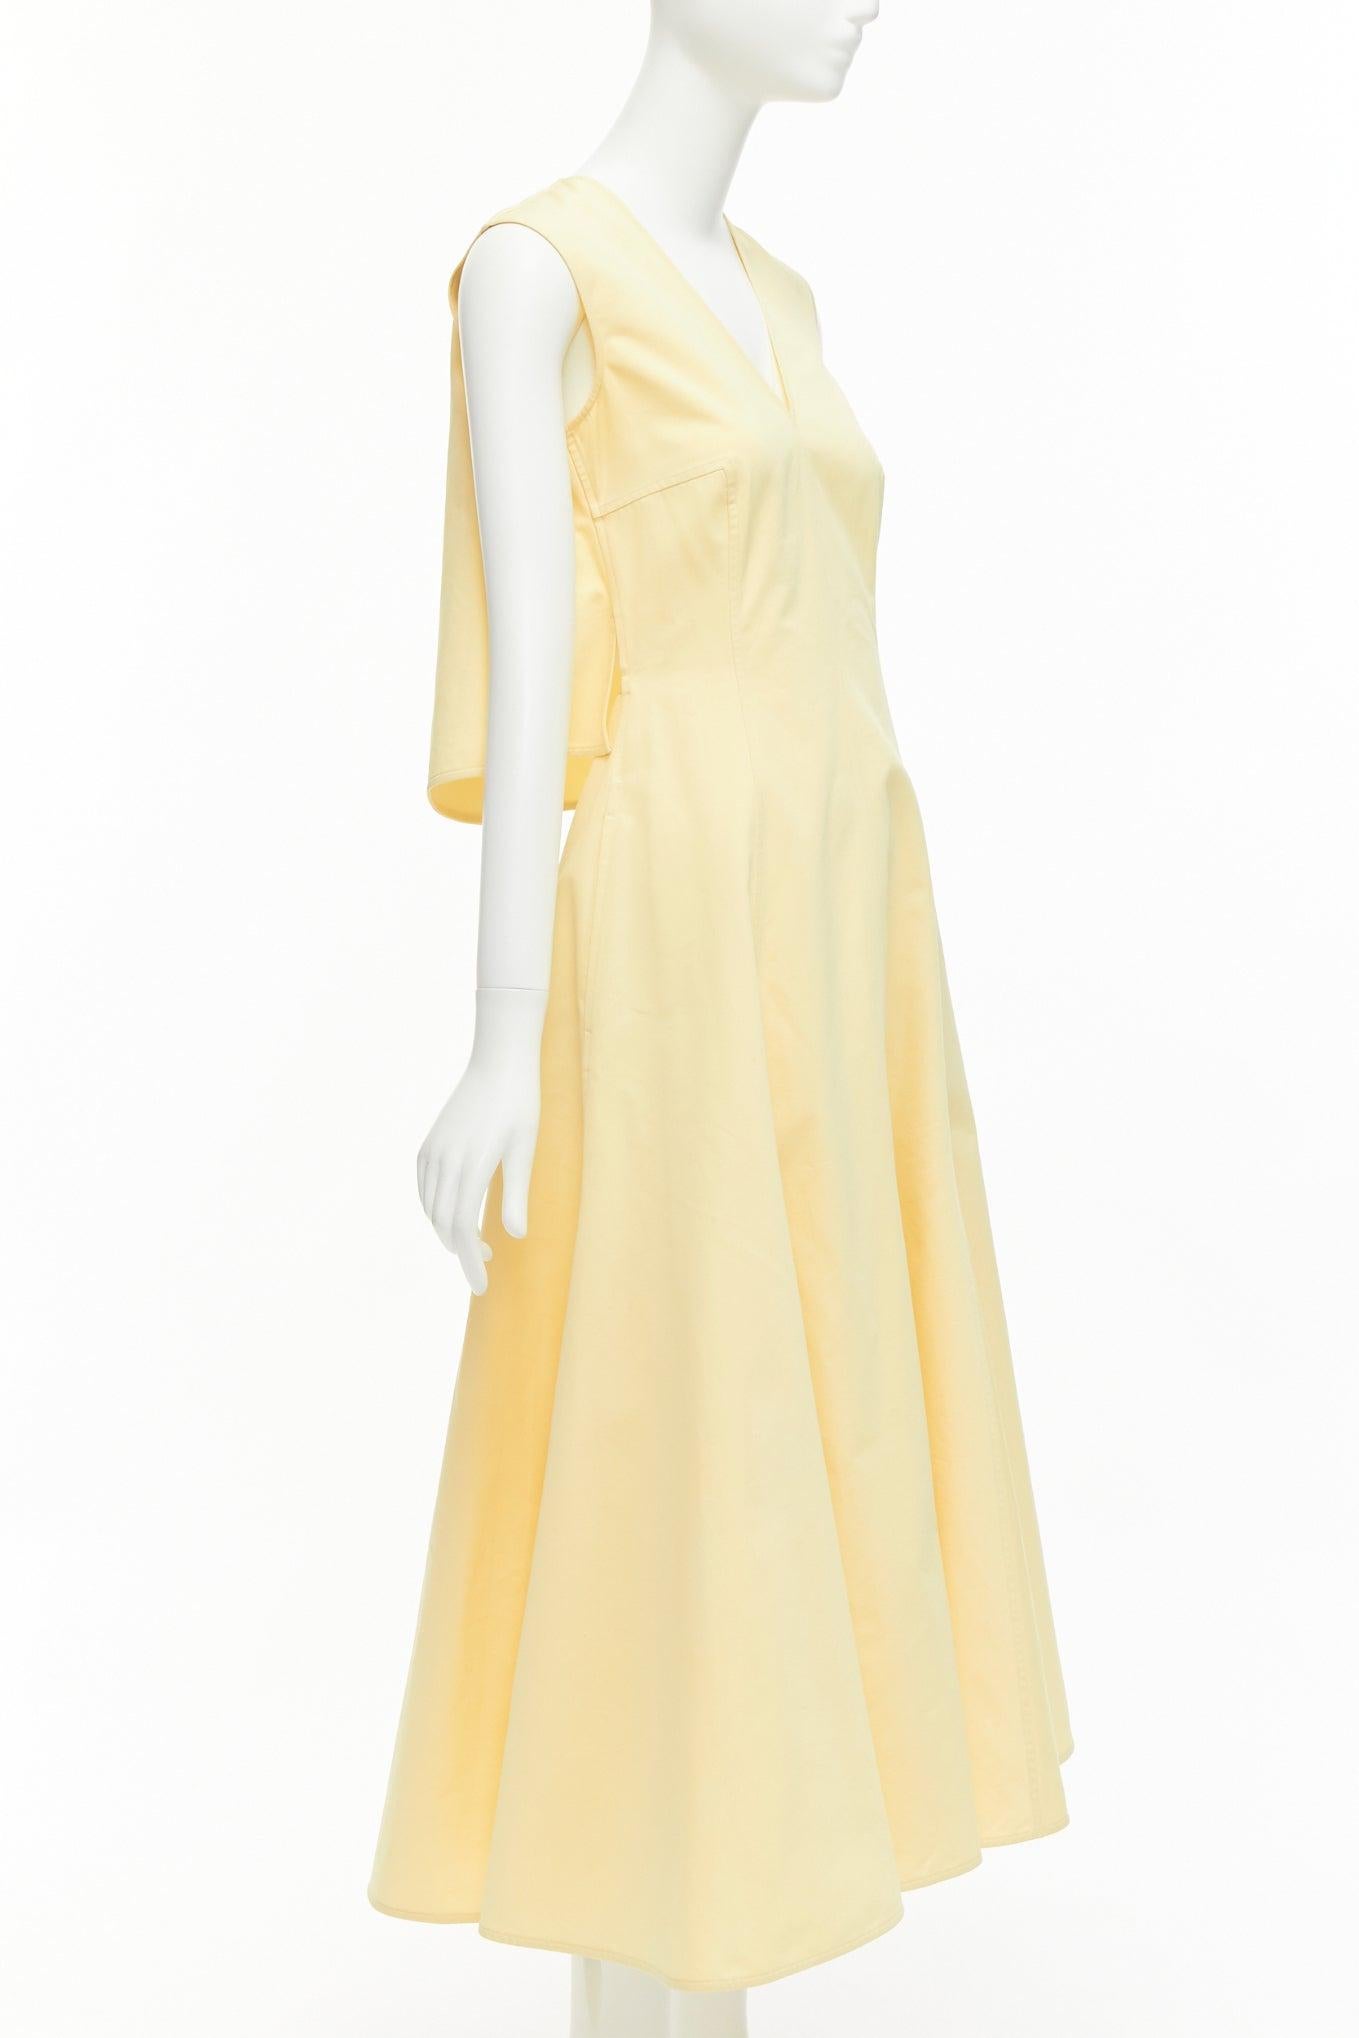 JIL SANDER cream cotton silk cape back cut out V-neck Aline midi dress FR32 XXS
Reference: LNKO/A02269
Brand: Jil Sander
Material: Cotton, Silk
Color: Cream
Pattern: Solid
Closure: Zip
Extra Details: Side zip.
Made in: Italy

CONDITION:
Condition: